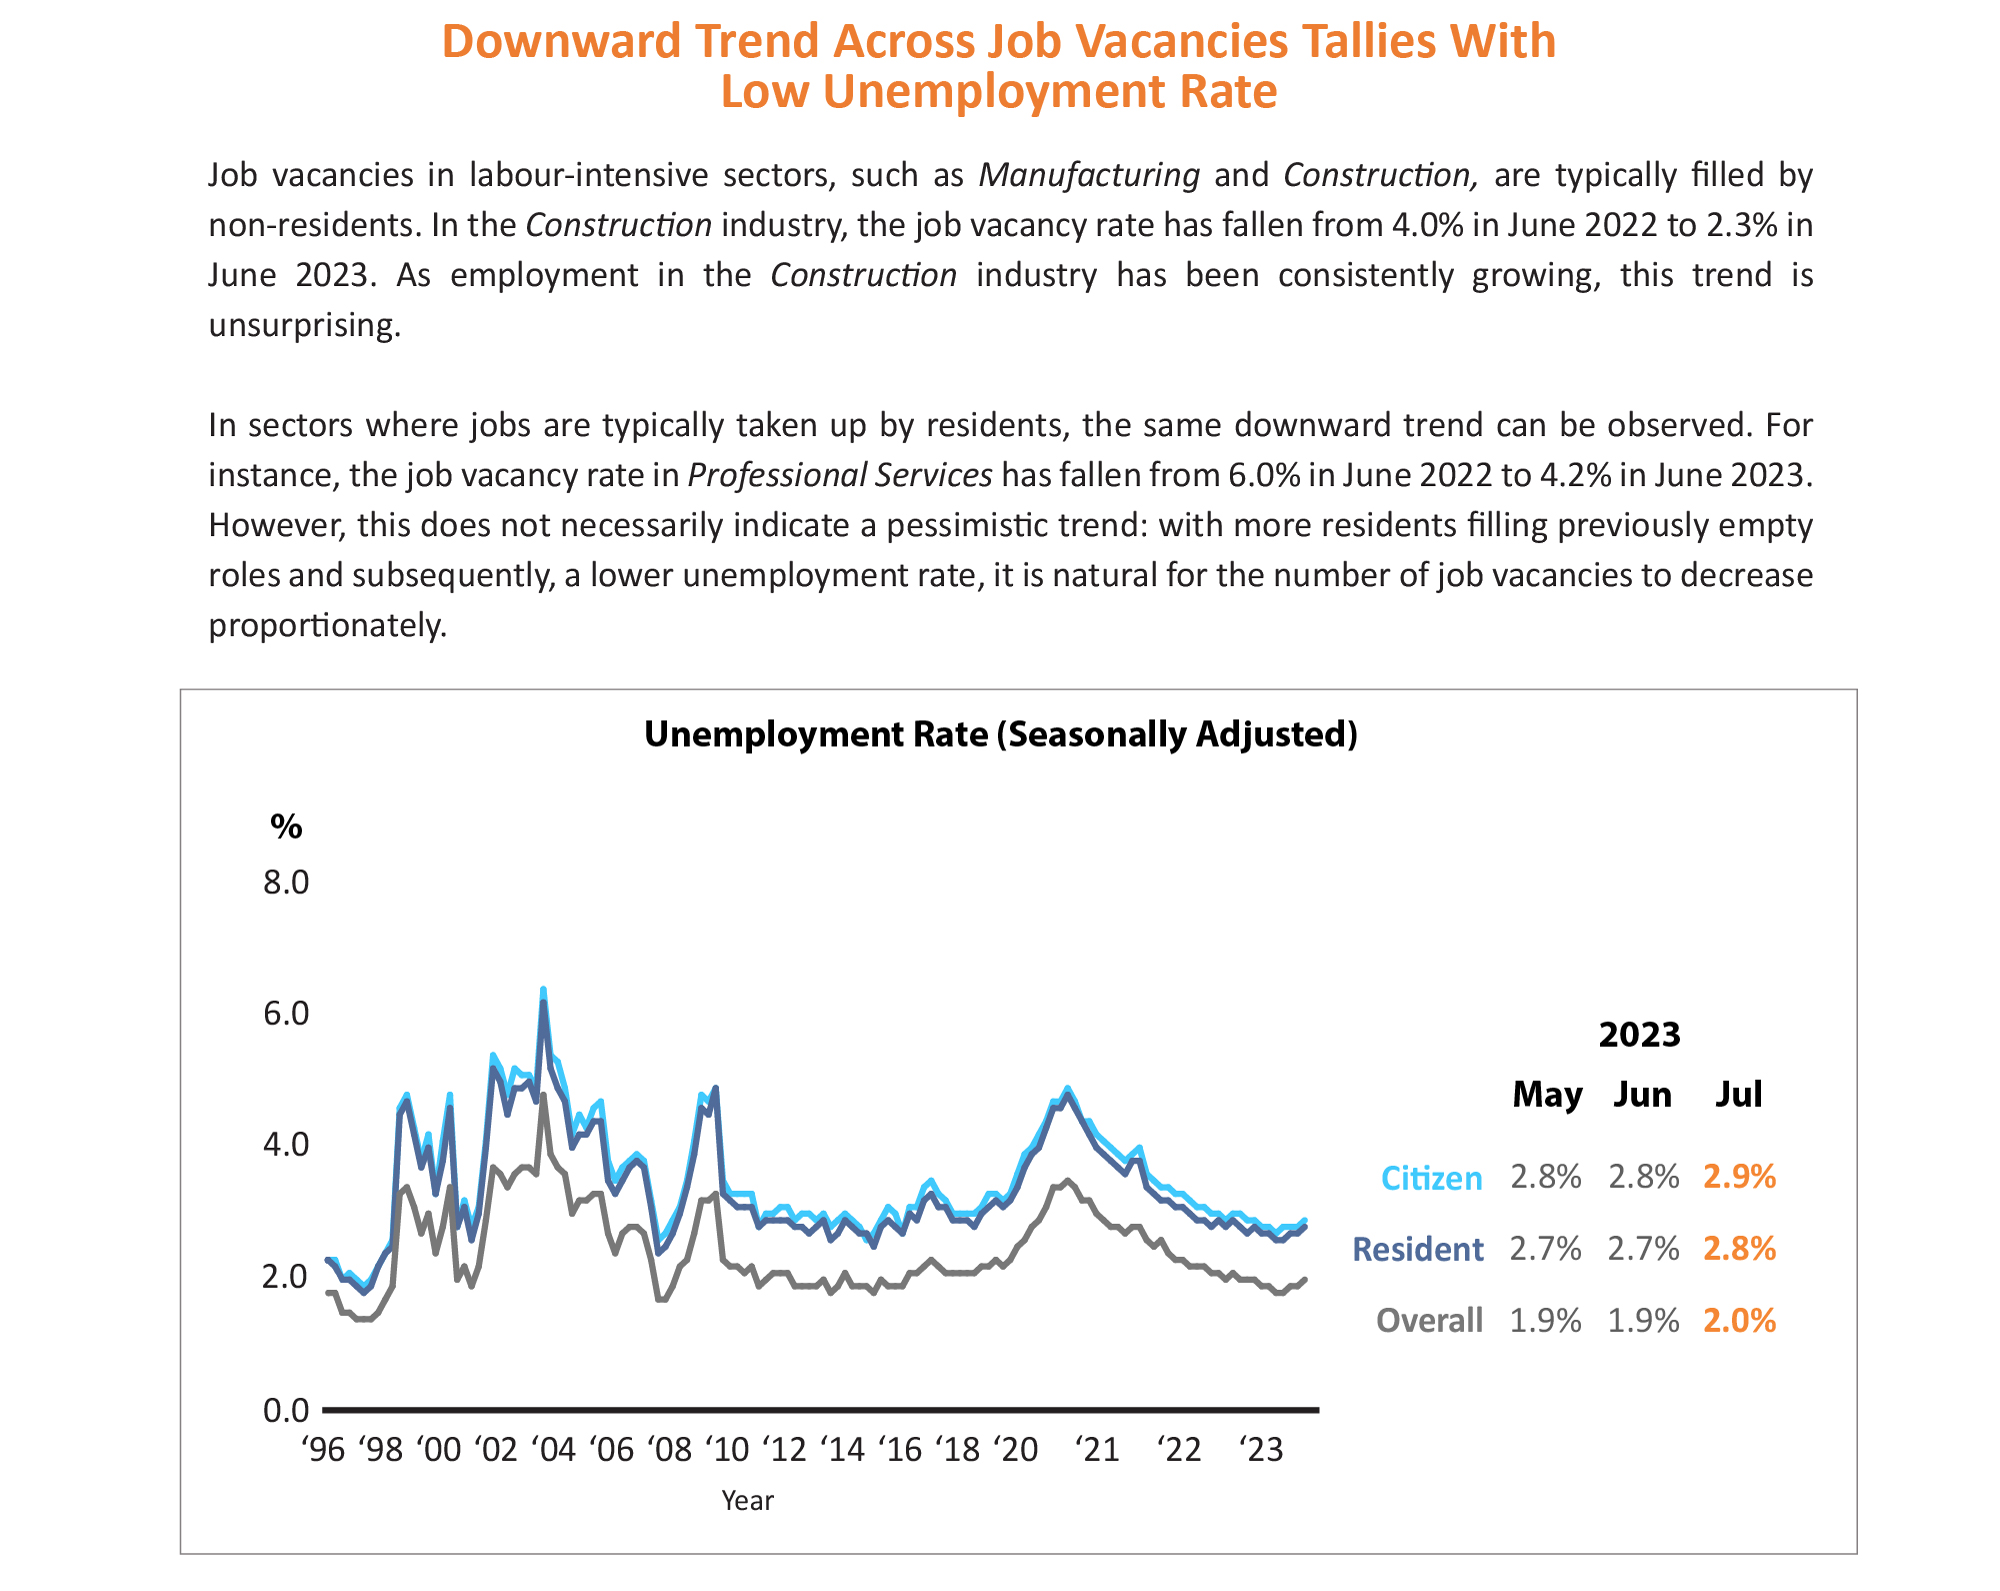 Downward Trend Across Job Vacancies Tallies With Low Unemployment Rate